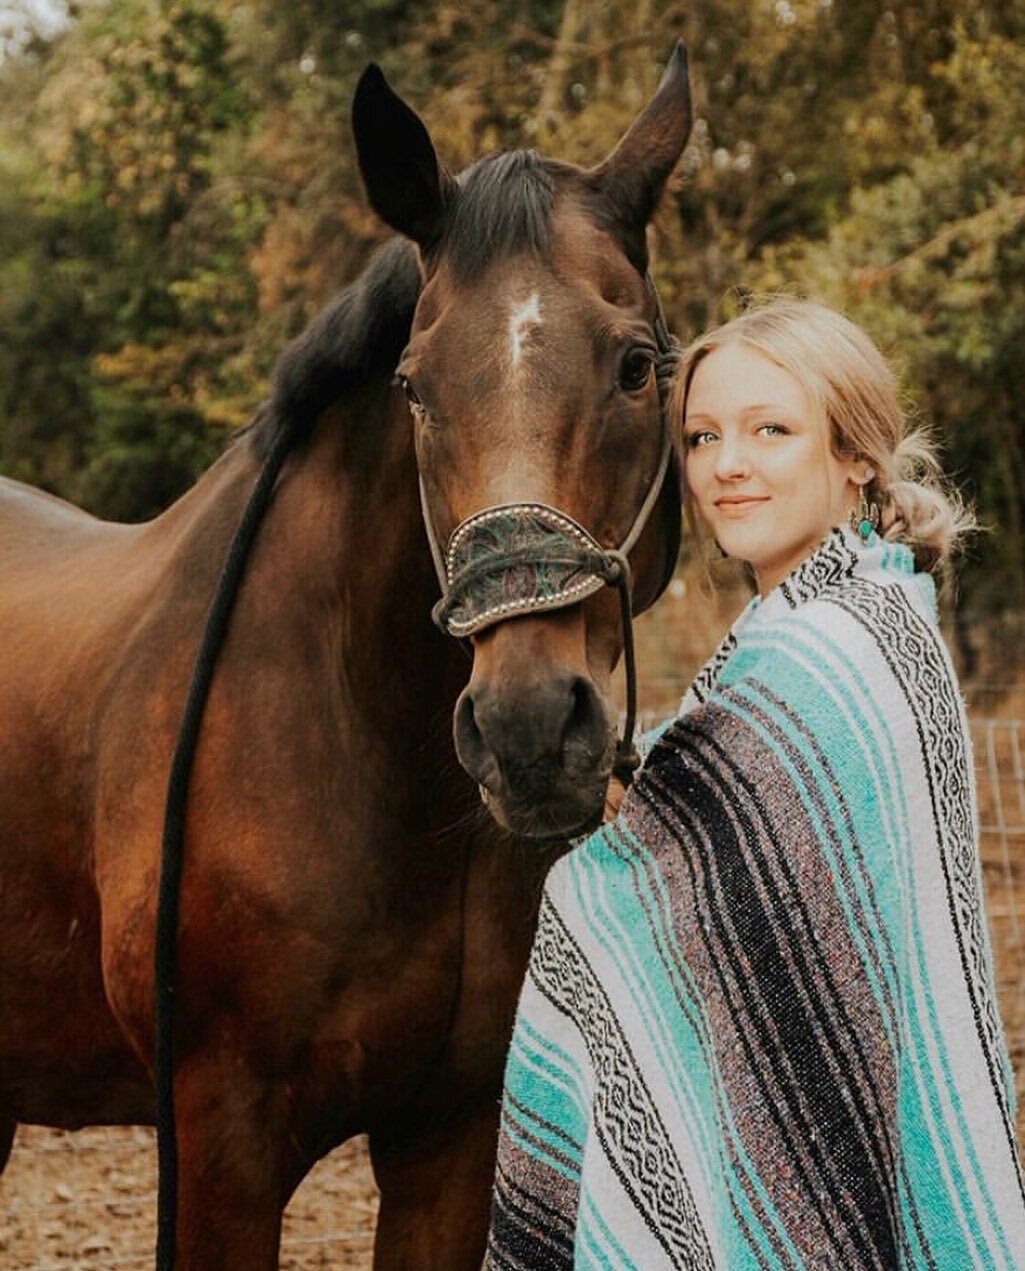 Hi babes! I have quite a few new followers so I think it&rsquo;s time to do another, meet the crazy gal behind the camera. 📸

Here are some things about me
-
&bull; I own two horses! My mare does dressage &amp; my gelding &amp; I are getting into th